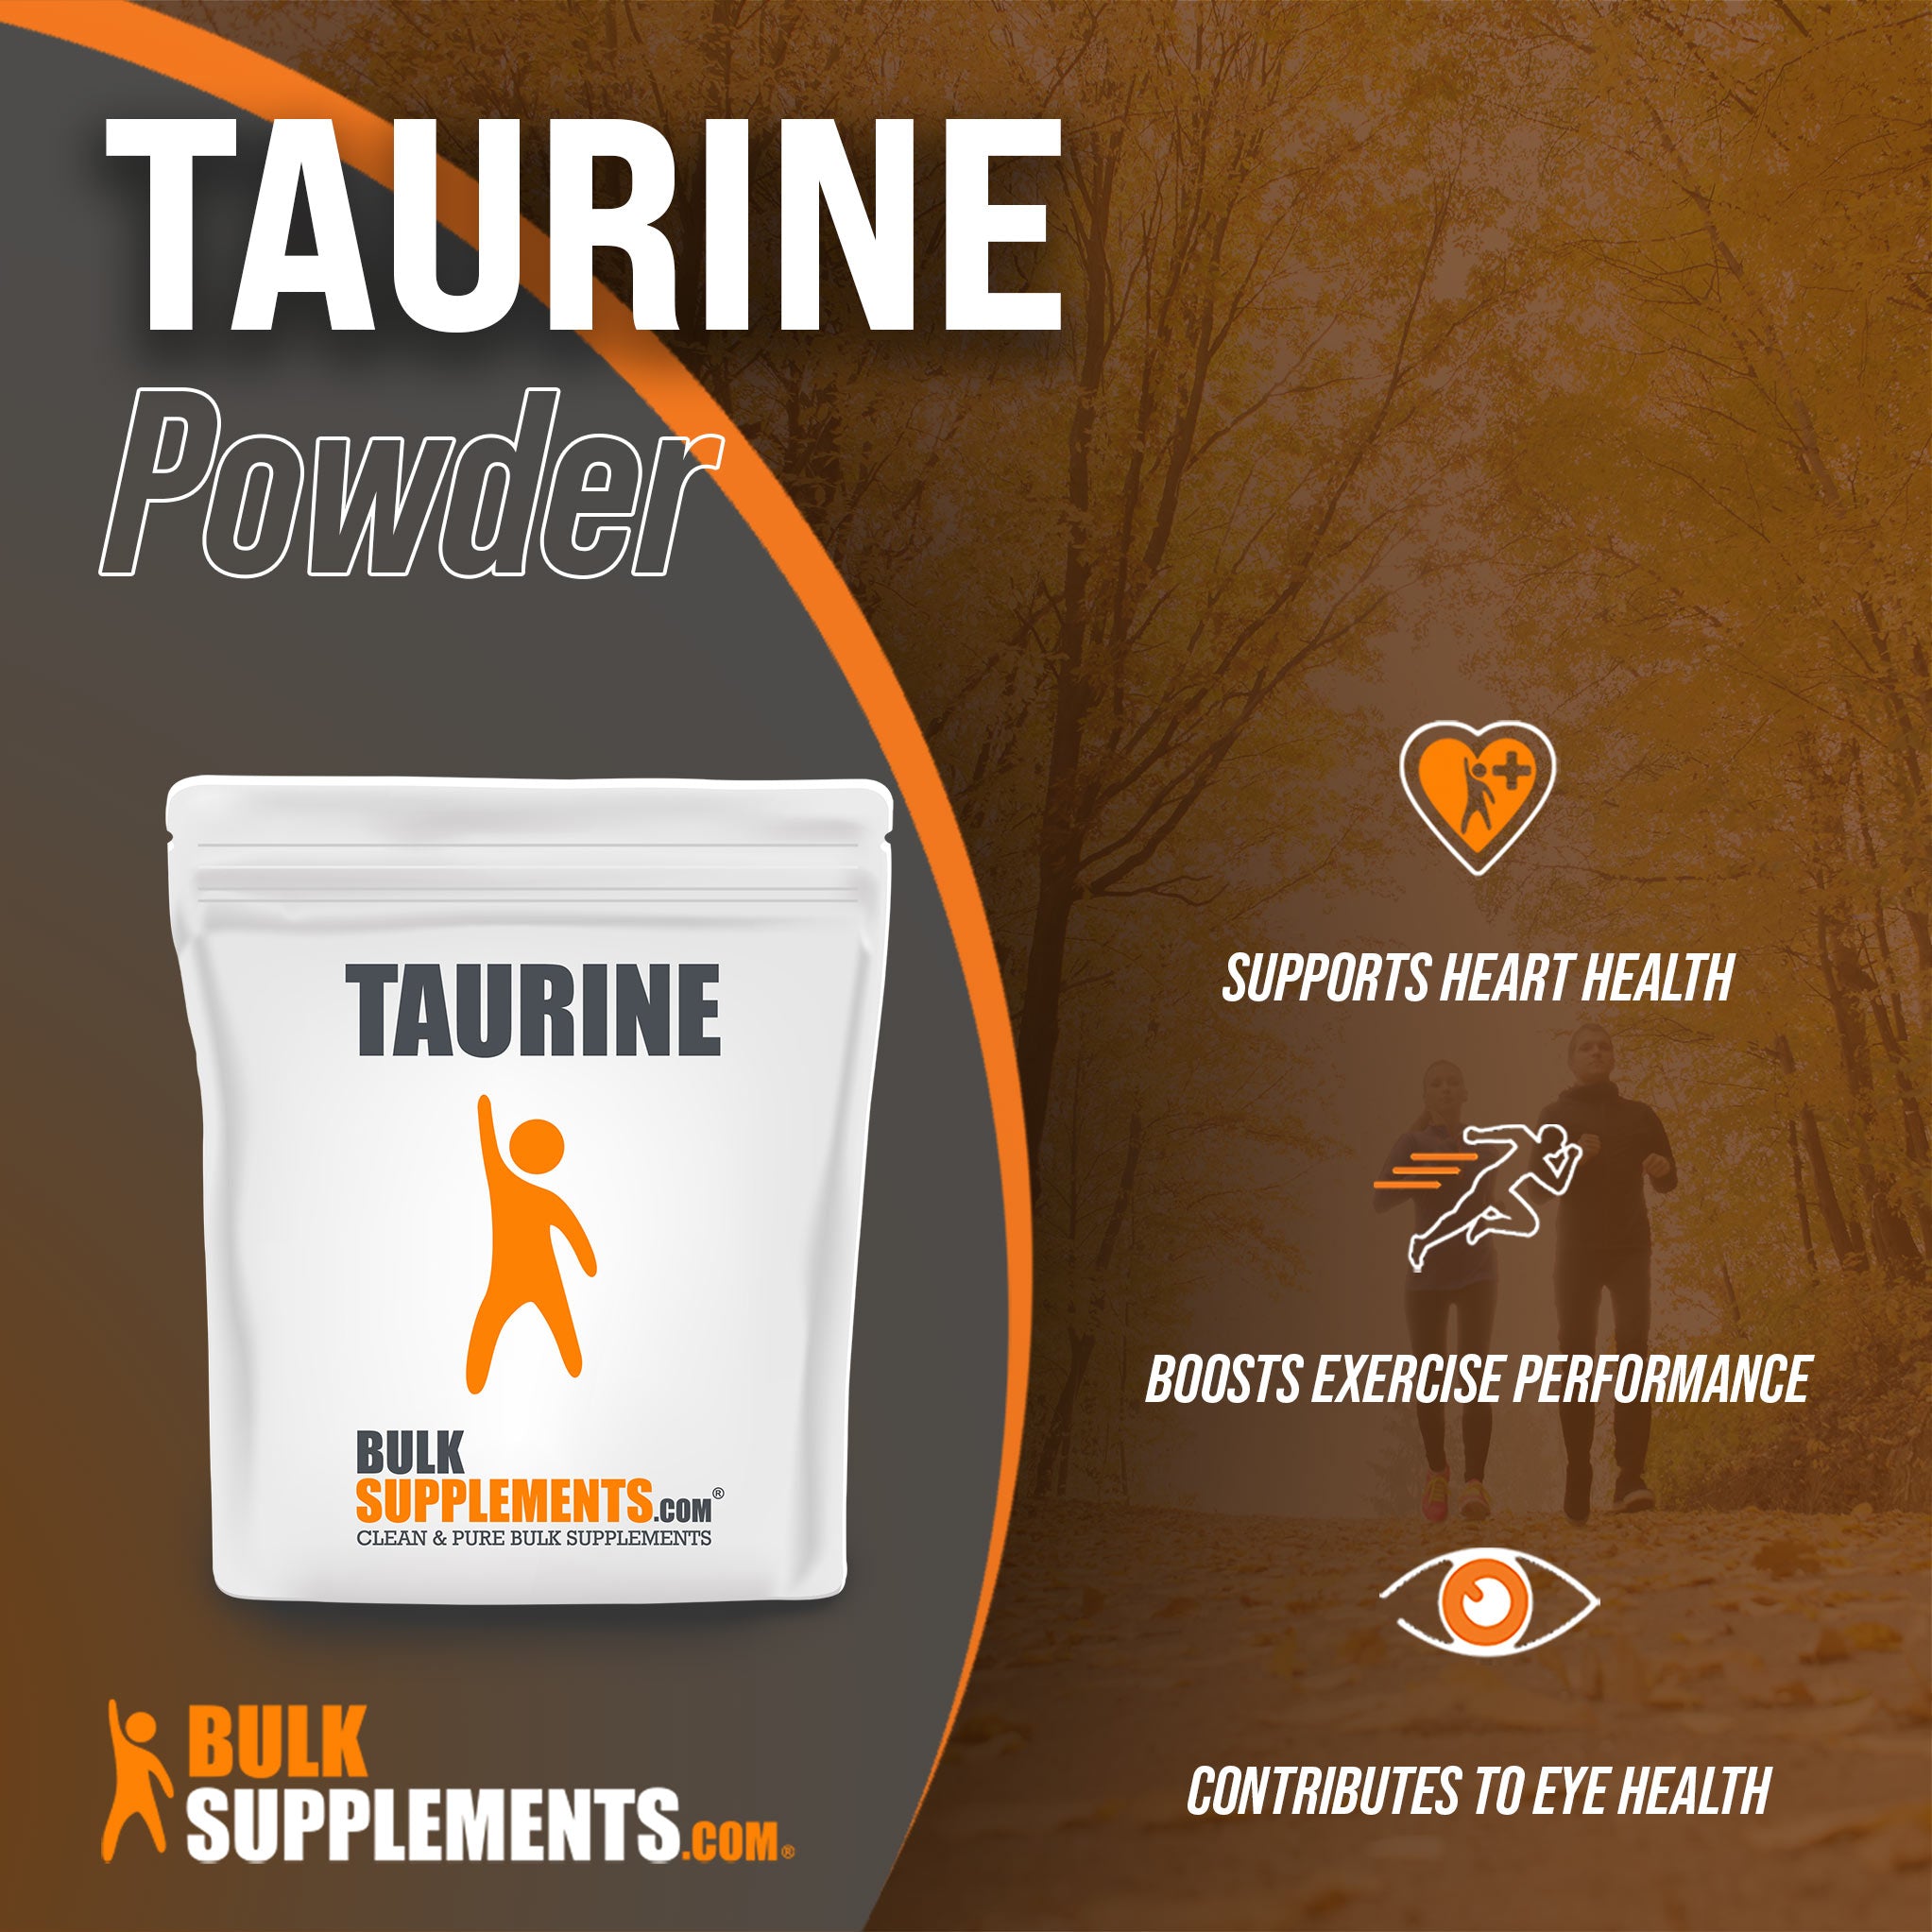 Benefits of Taurine Powder: supports heart health, boosts exercise performance, contributes to eye health